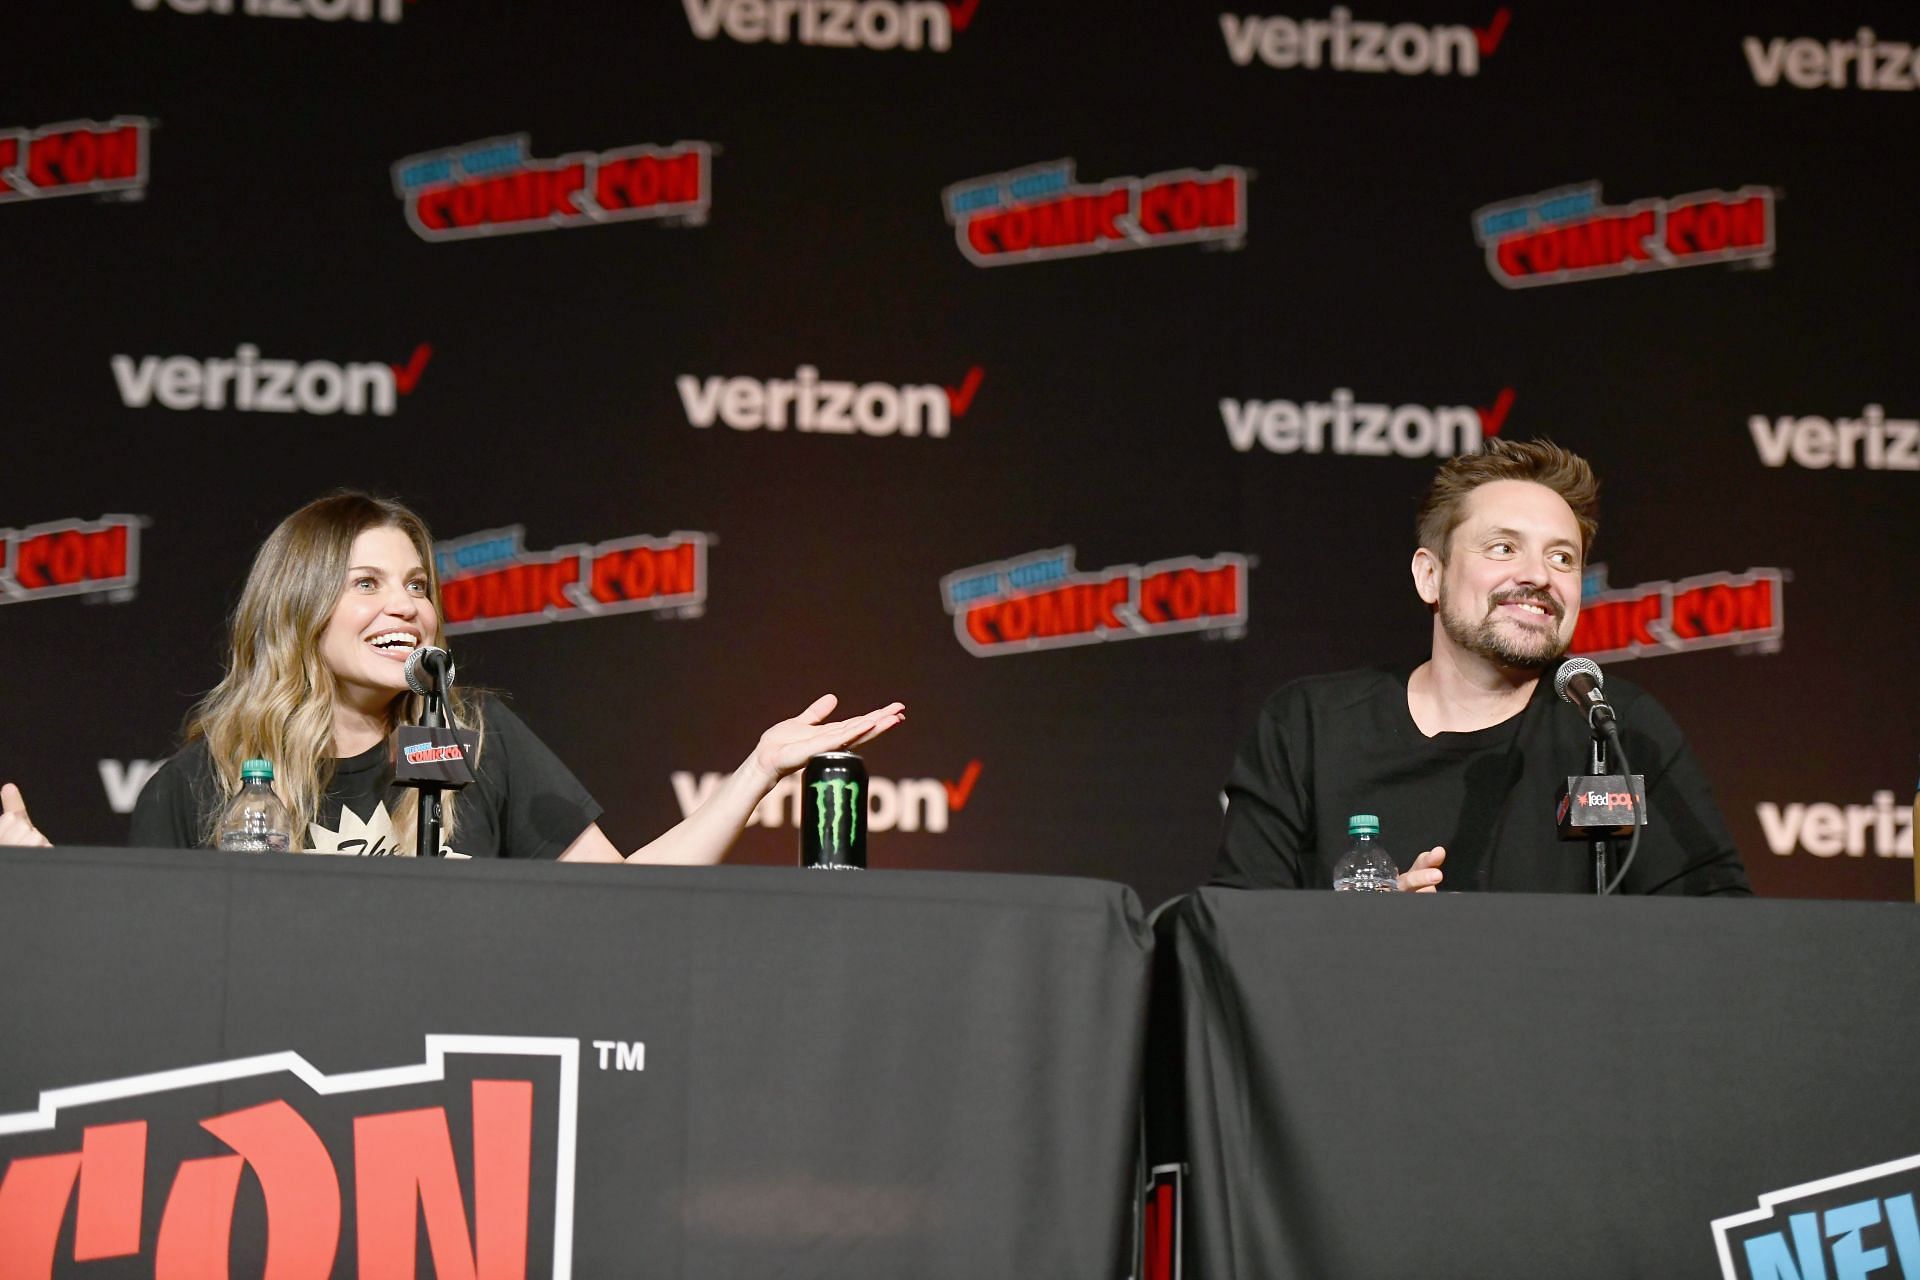 Danielle Fishel and Will Friedle at the New York Comic Con 2018 (Image via Getty)